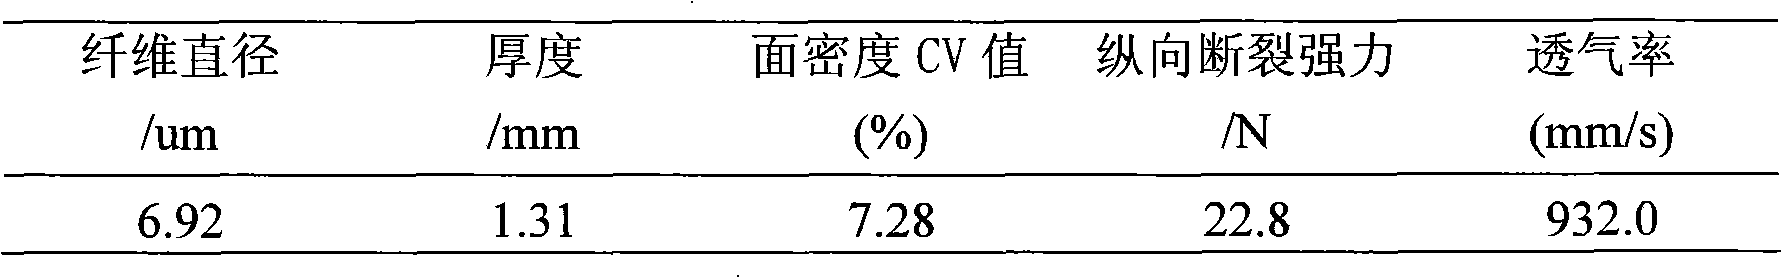 Manufacture method of biodegradable non-woven material